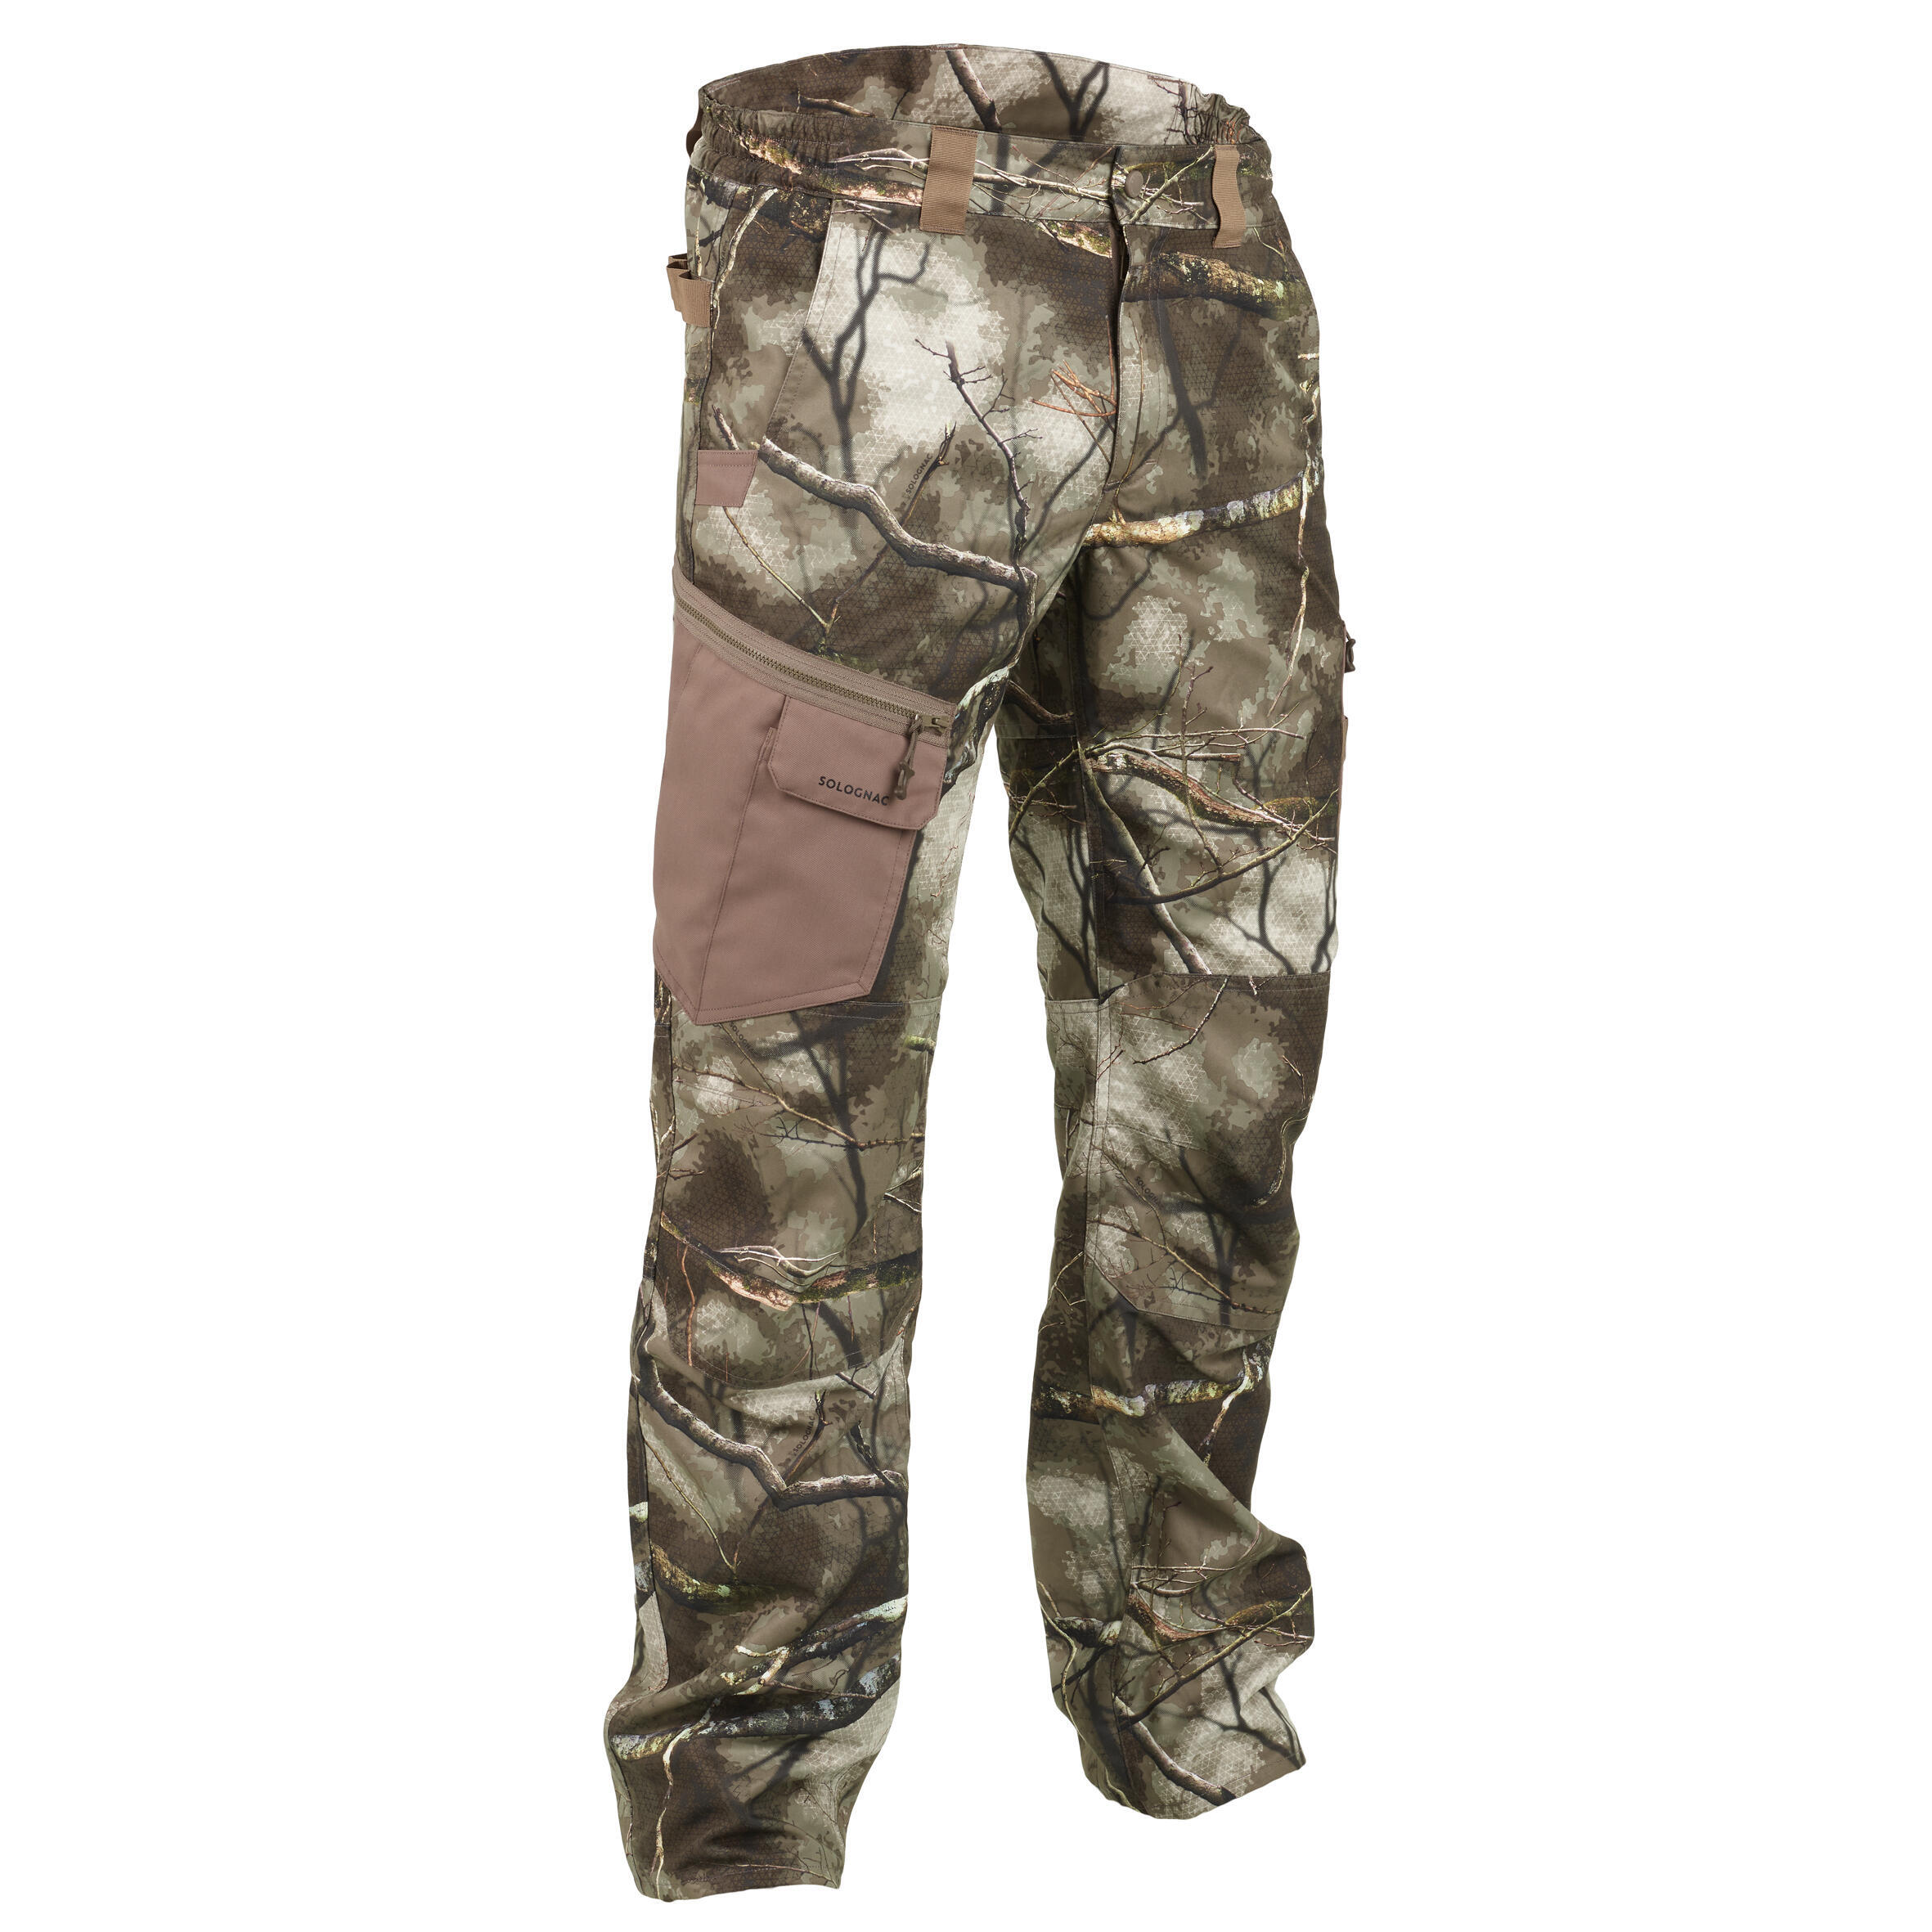 Solognac 500 Lightweight, Breathable Hunting Trousers - Kit Pest